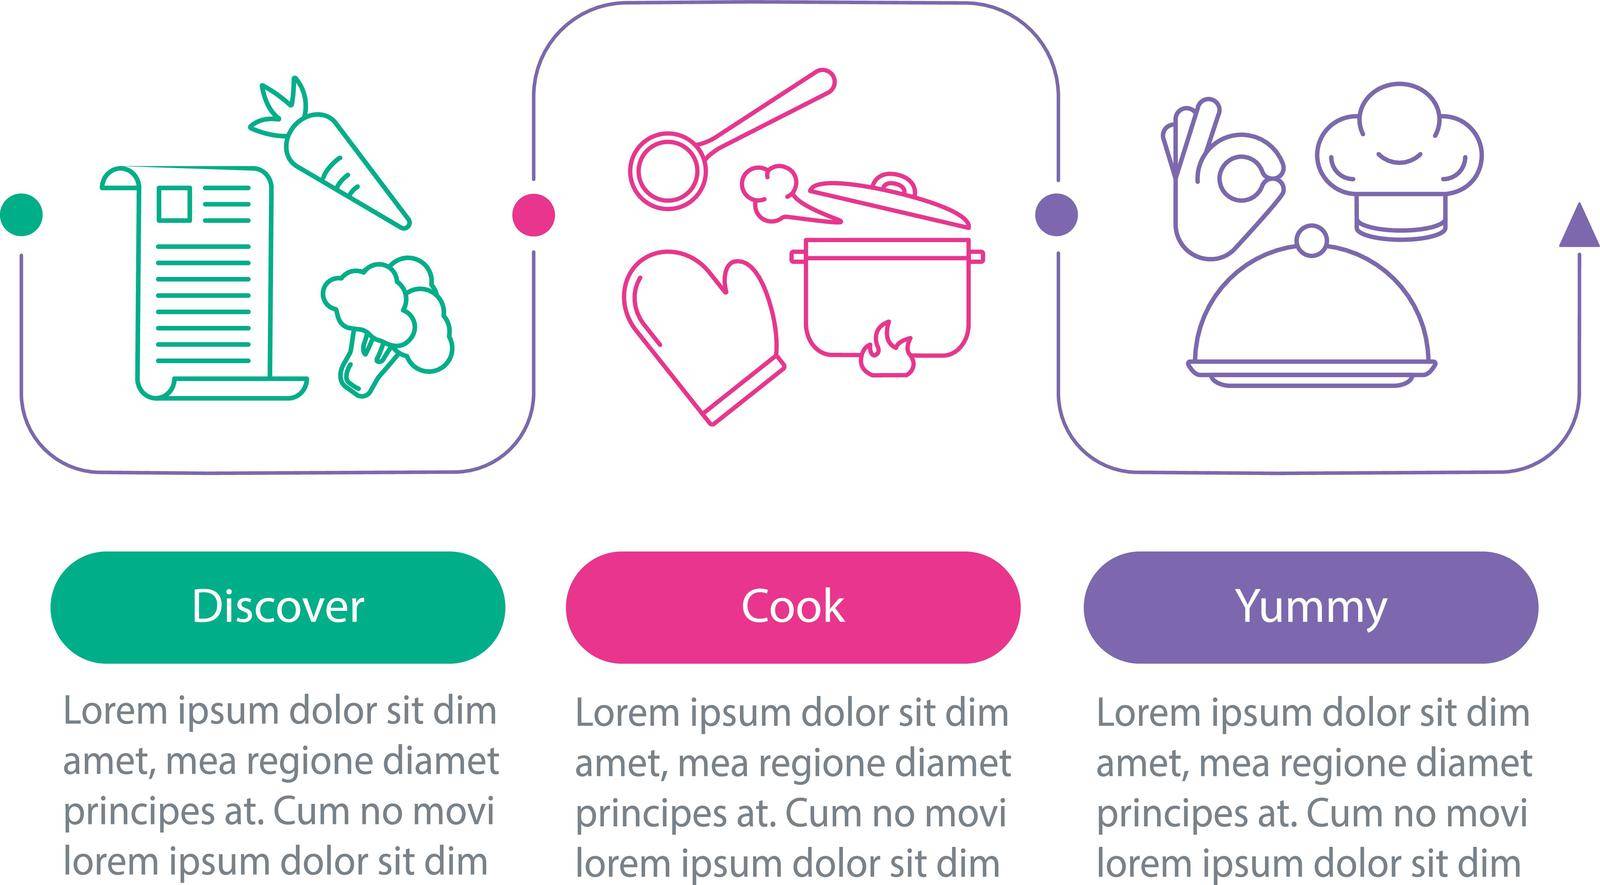 Cooking food vector infographic template. Discover recipes, meal preparation, yummy. Data visualization with three steps and options. Process timeline chart. Workflow layout with icons